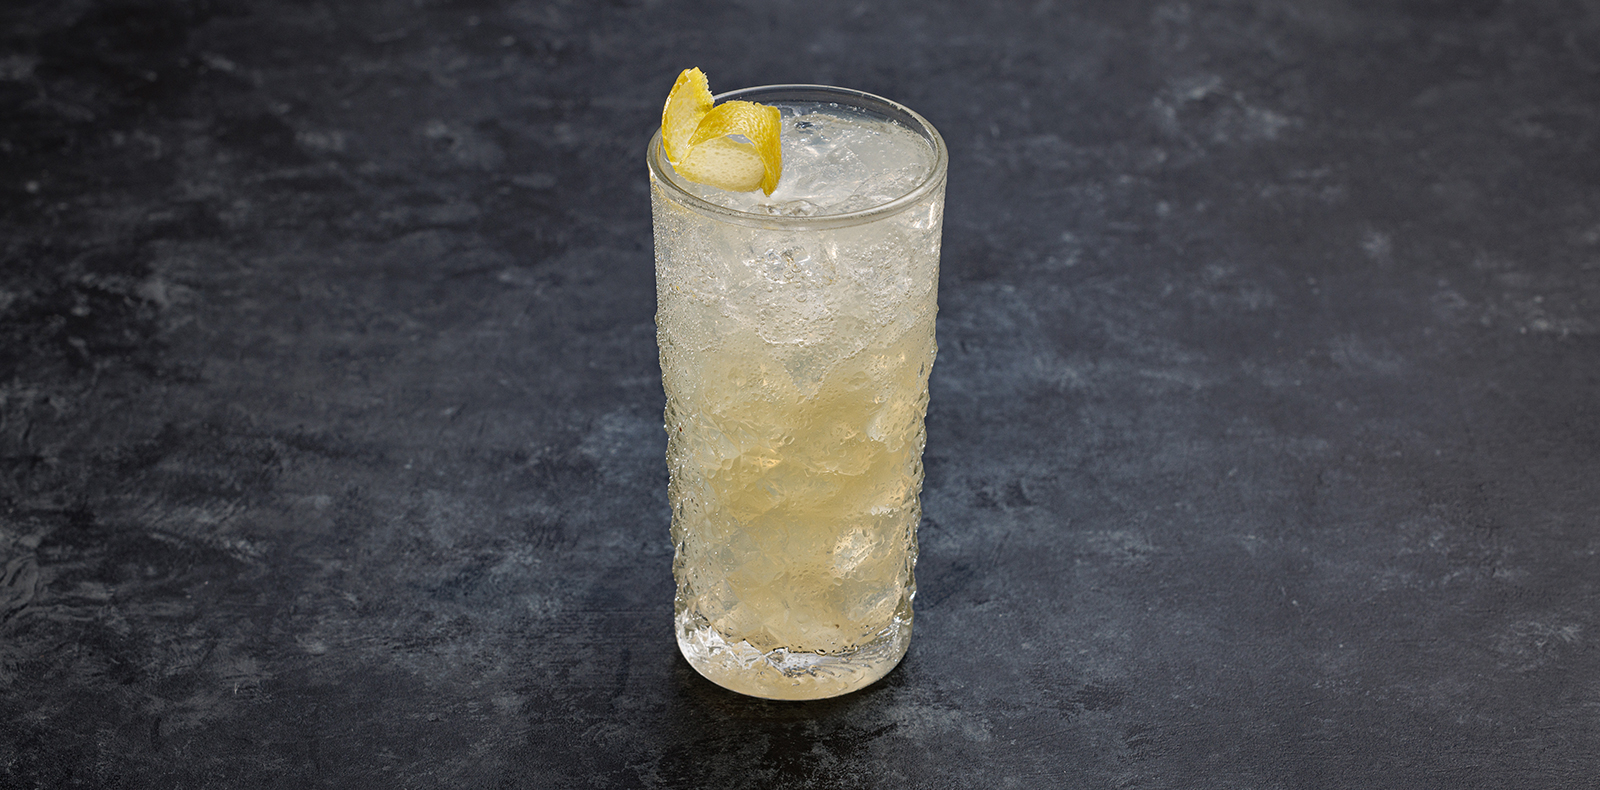 Aviation American Gin, Lillet Blanc, St-Germain Elderflower Liqueur, lemon juice, mint simple syrup and soda water. Also available on the brunch, happy hour and late-night happy hour menus